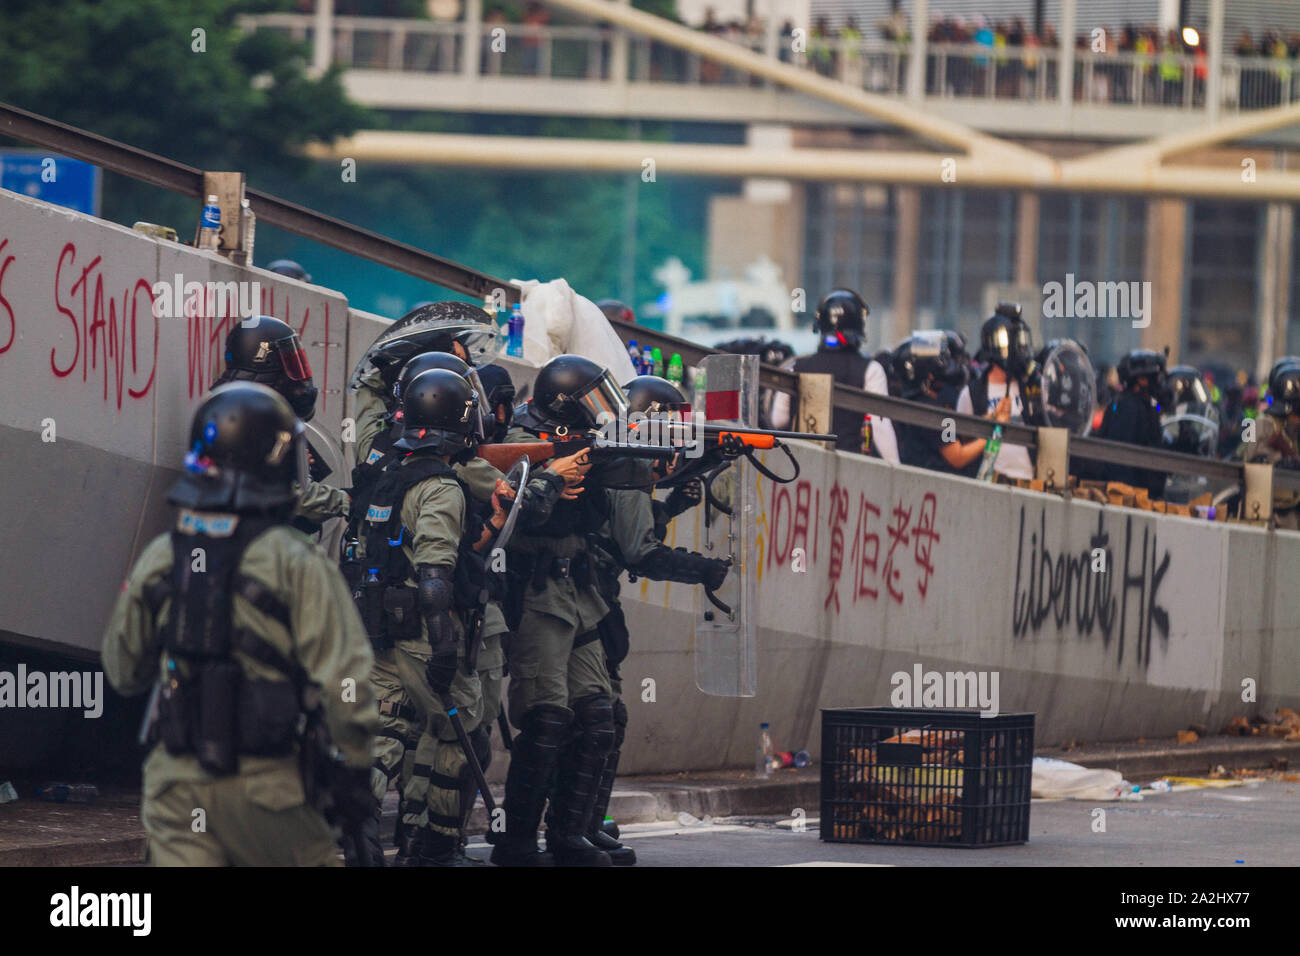 Riot police taking aim on protesters in Hong Kong Stock Photo